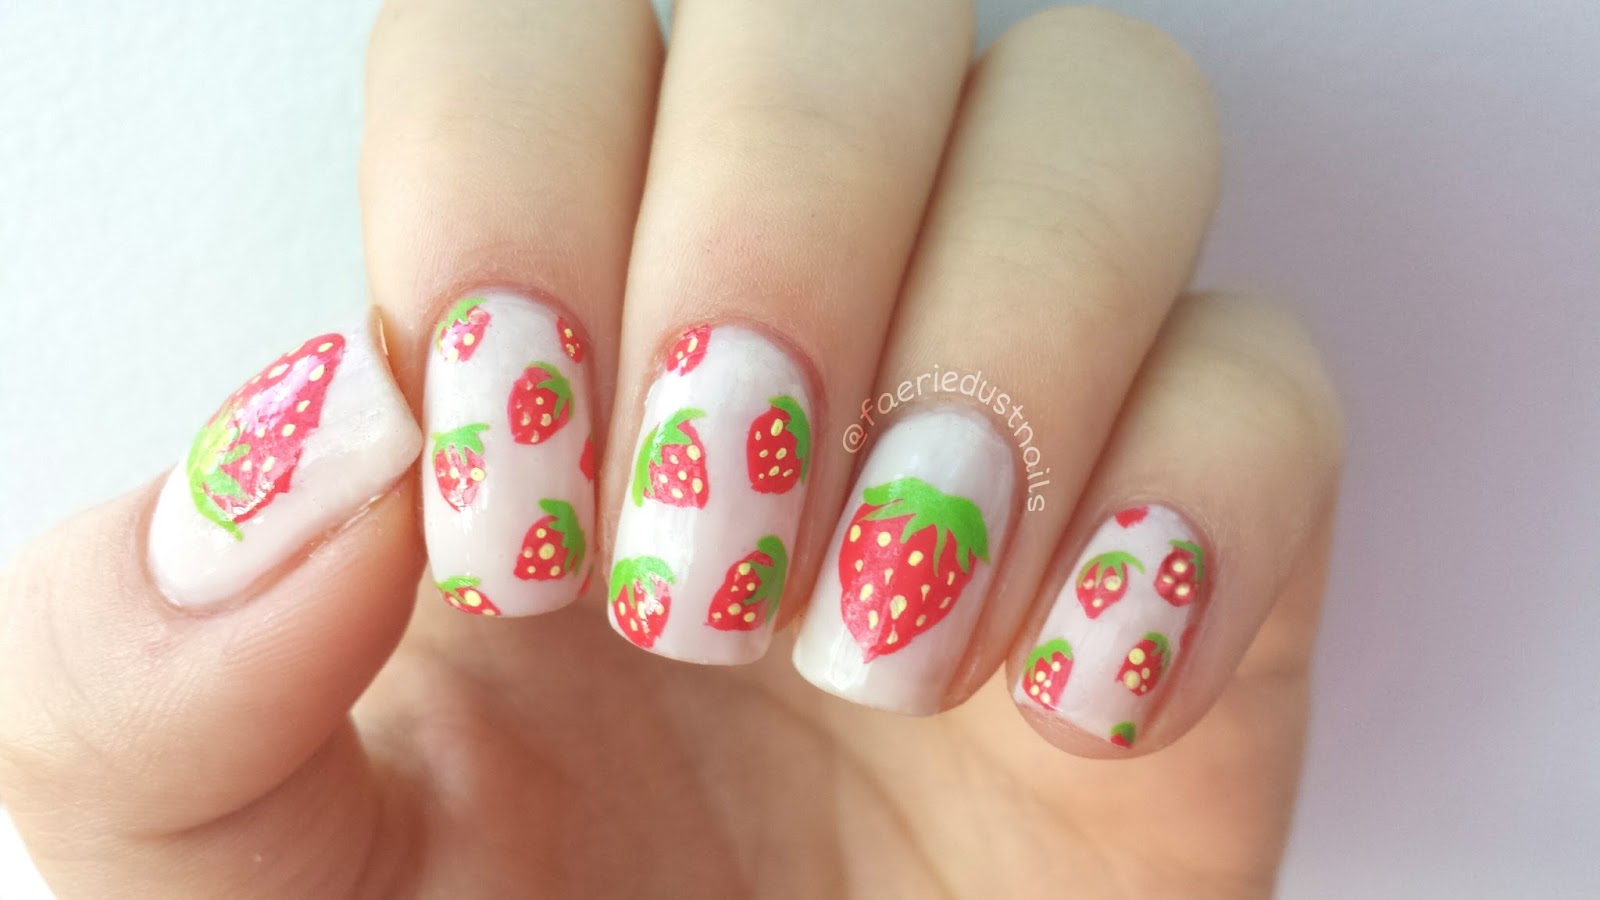 3. Cute Strawberry Nails - wide 2